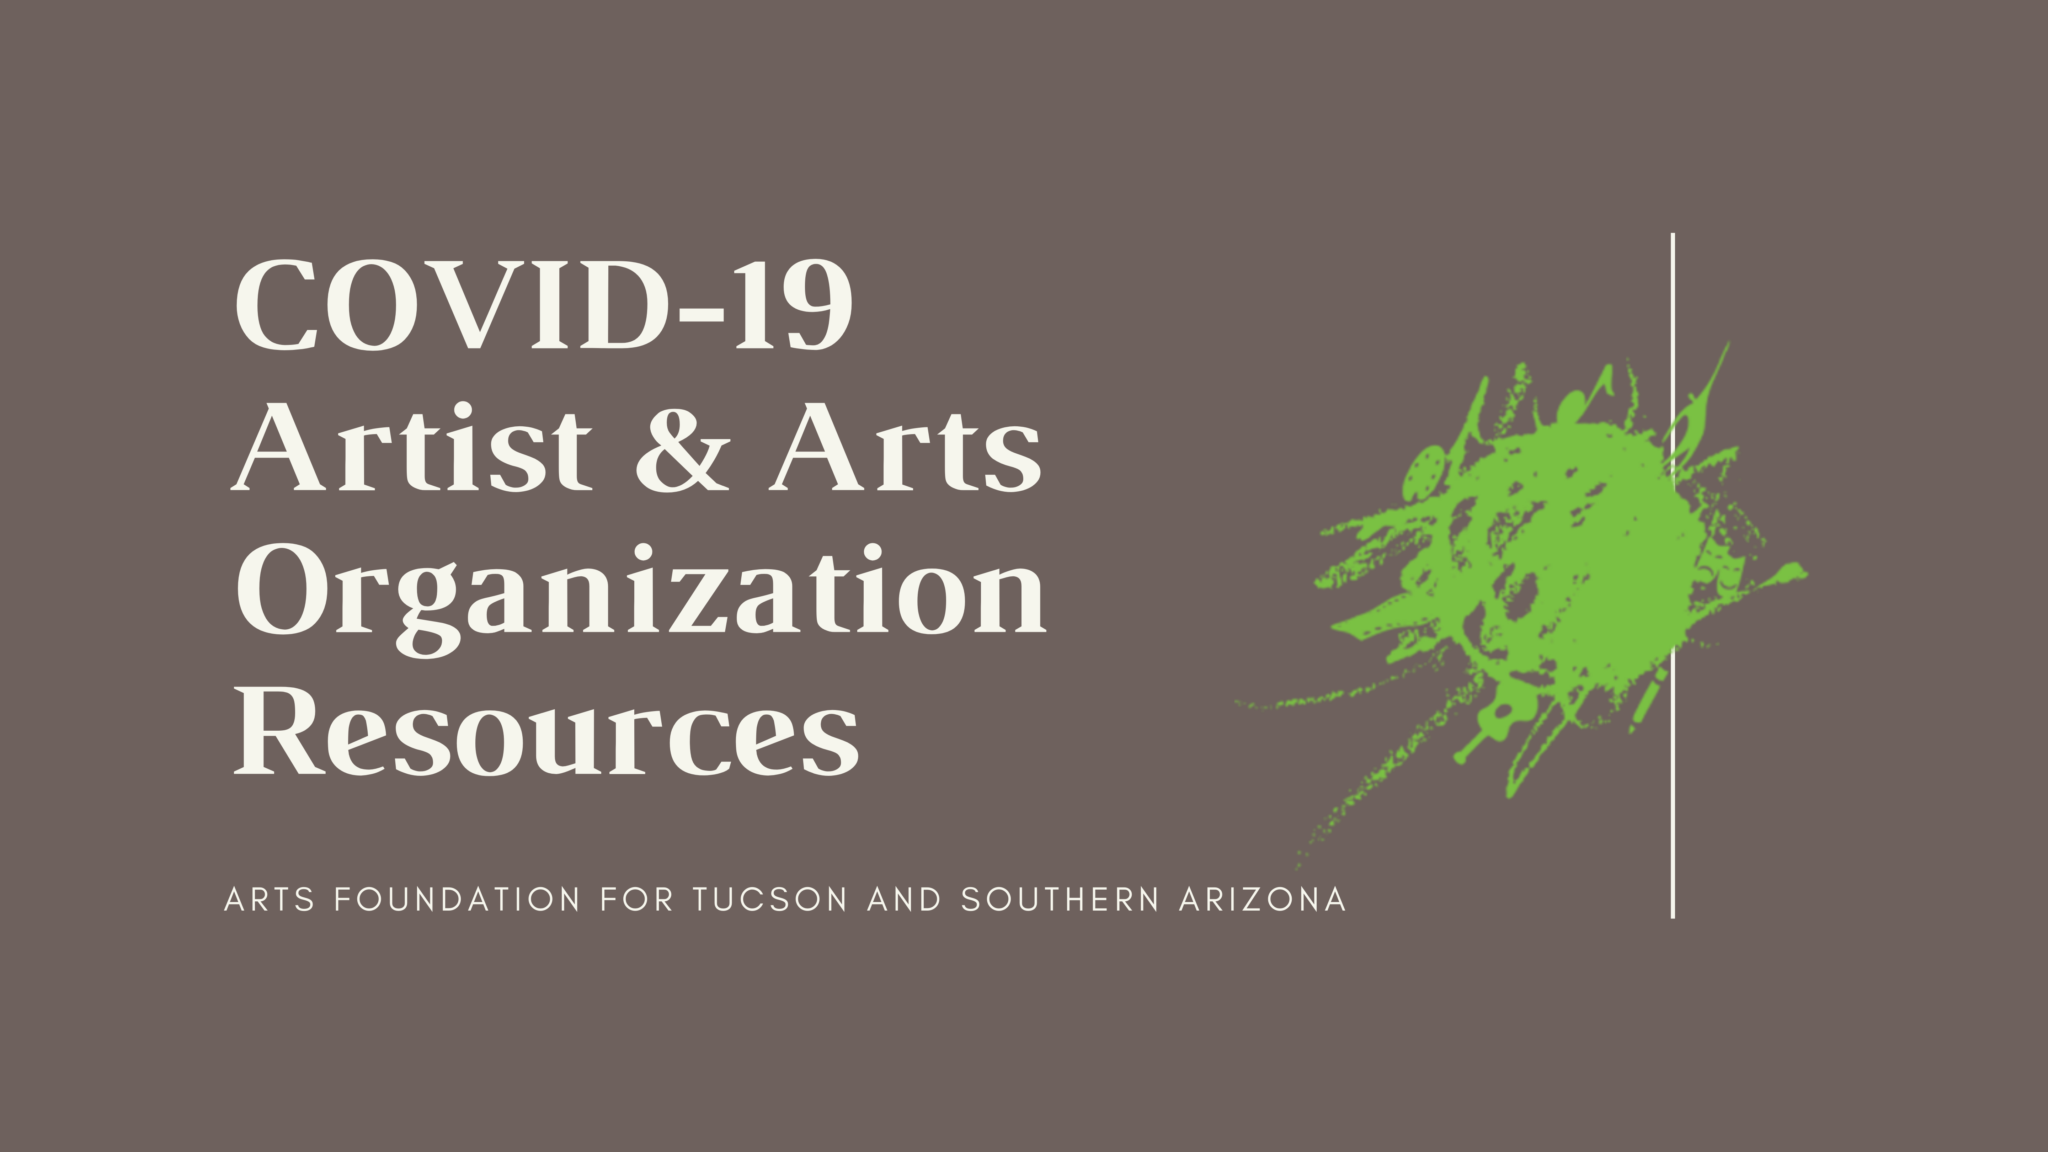 COVID-19 Resource List for Artists and Arts Organizations